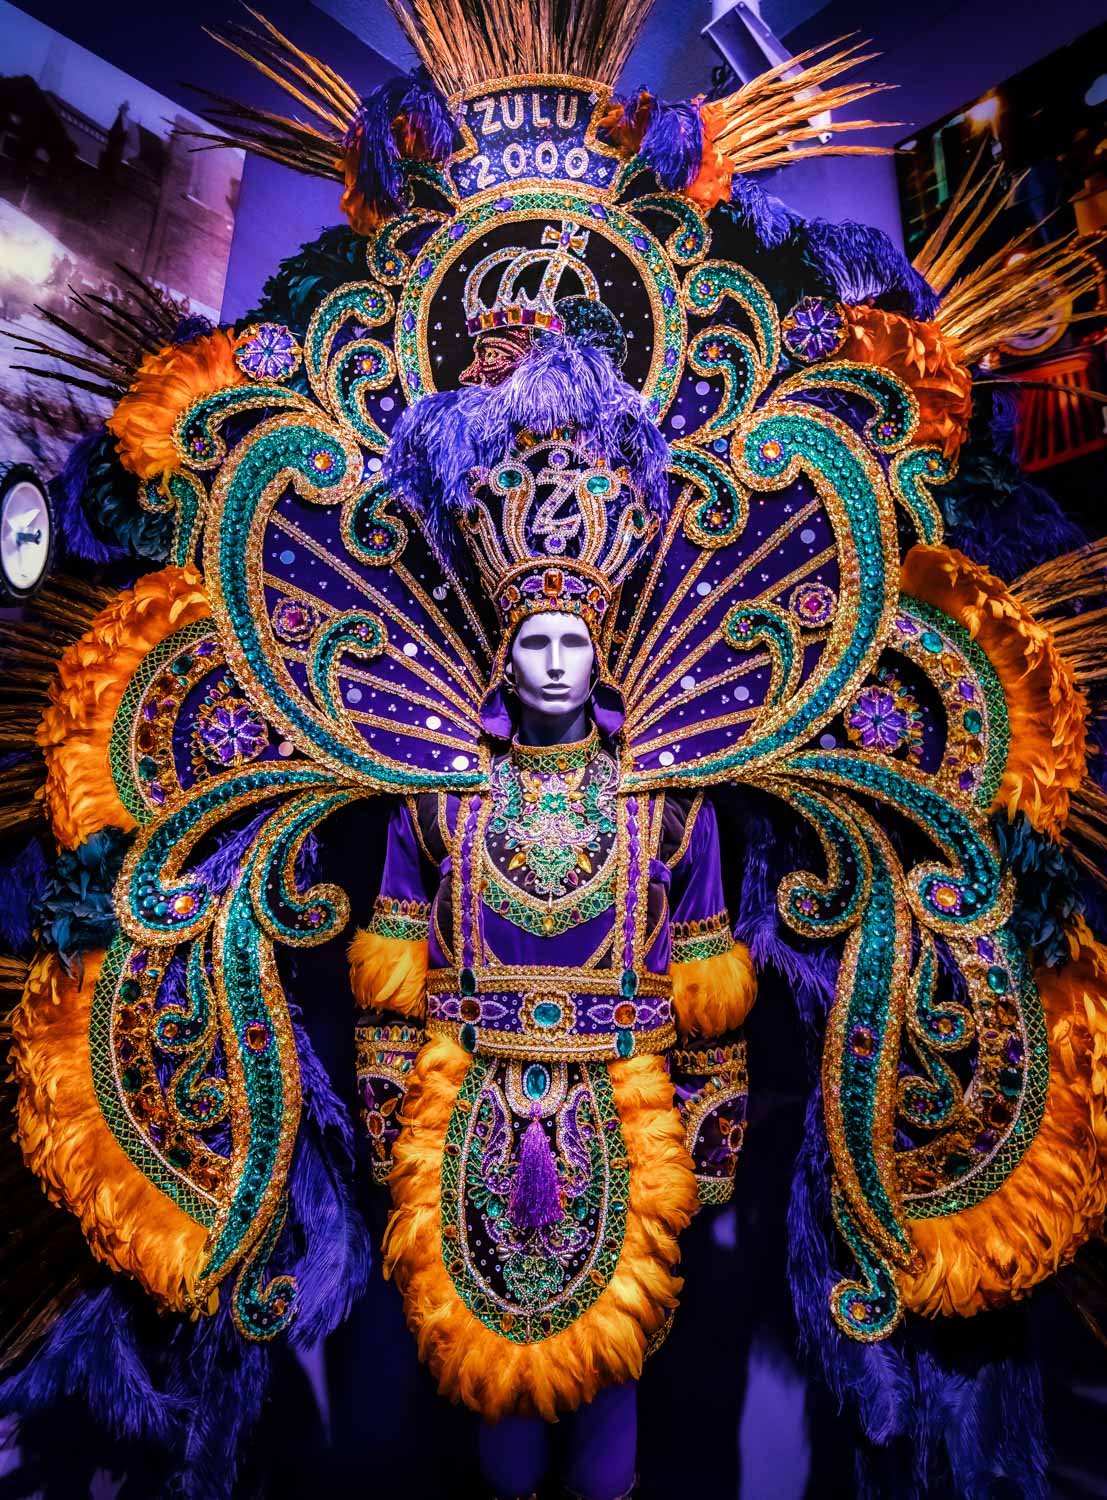 New Orleans Events Calendar 2022 Top 30 New Orleans Festival To Experience Before You Die (2022)